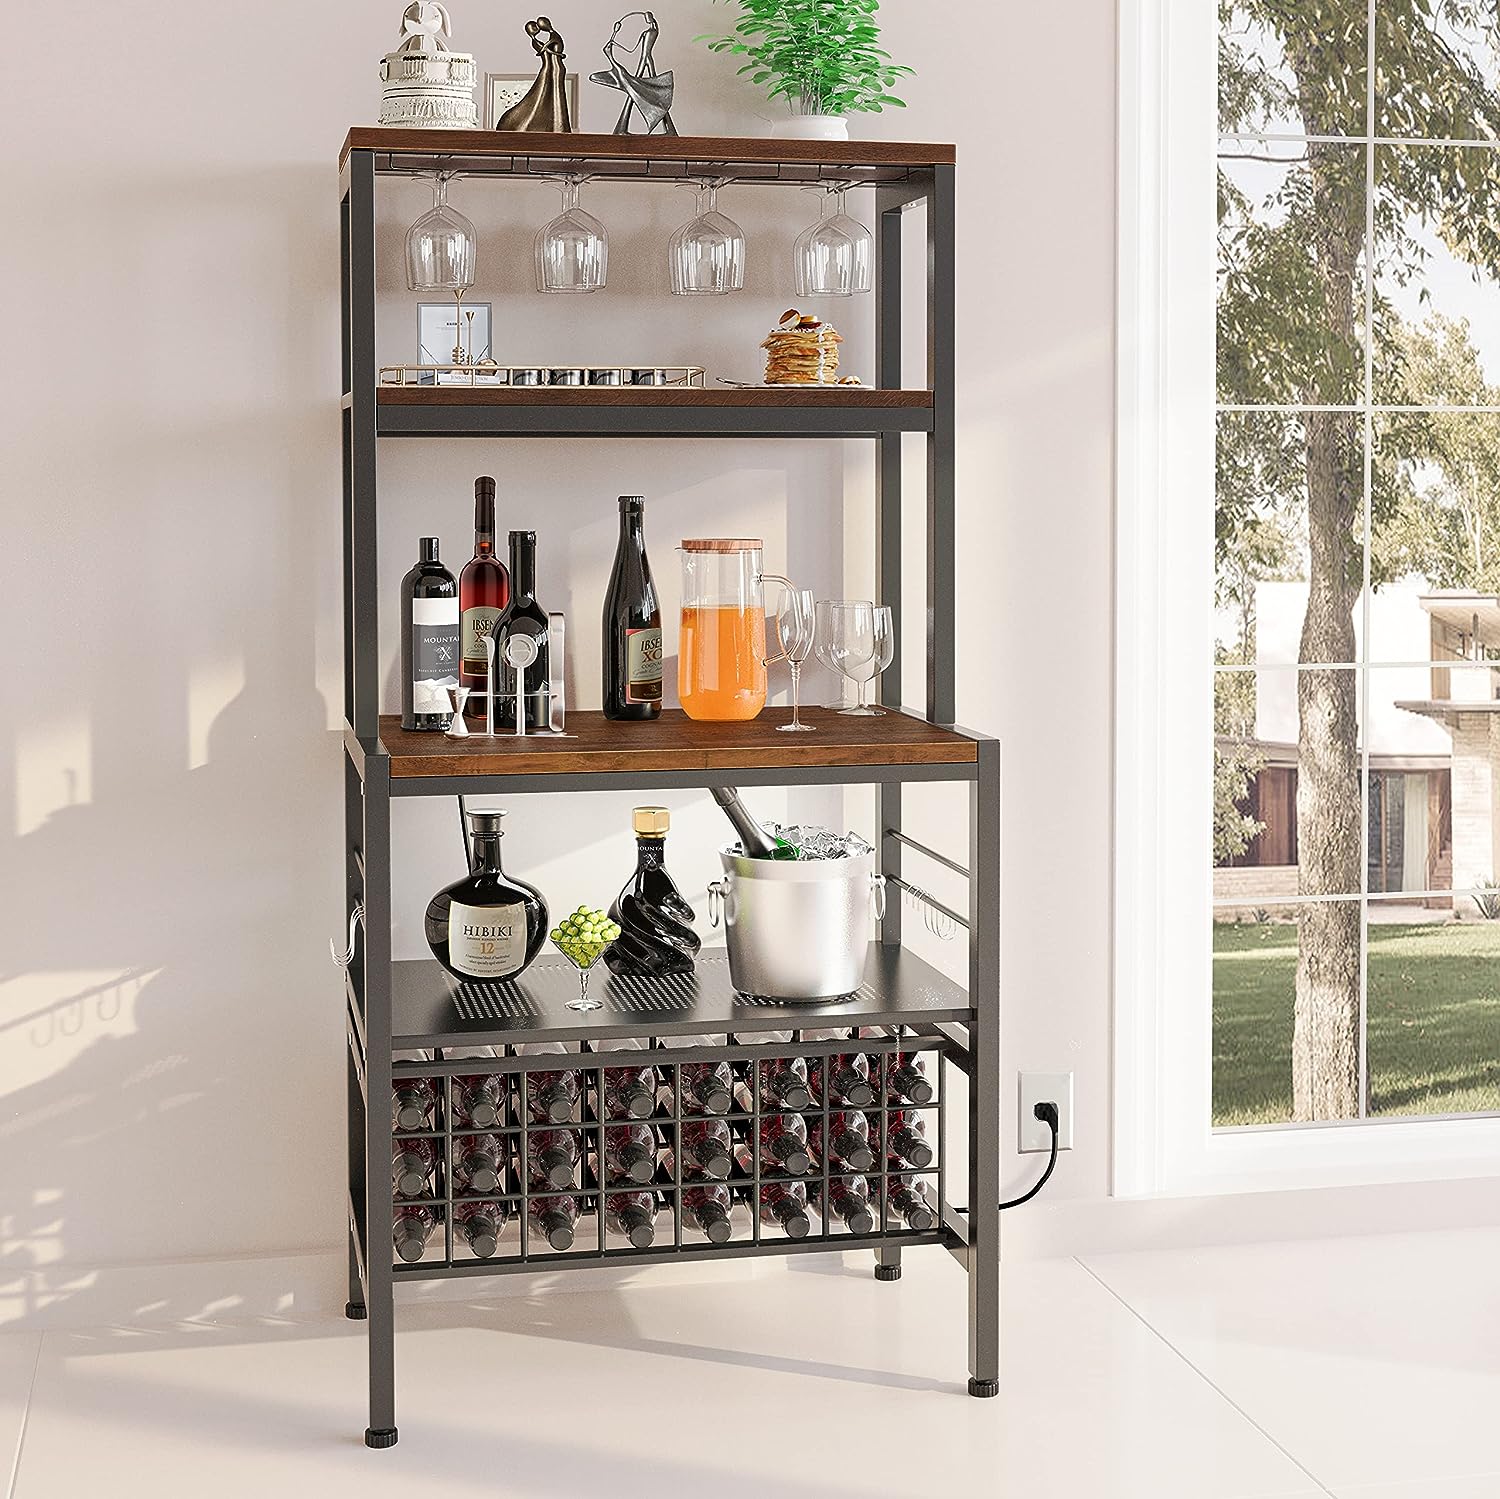 Industrial Wine Rack with Power Outlet, LED Strip, Wine Storage, Glasses Holder, Bottle Shelf and Bar Stand for Liquor and Glasses